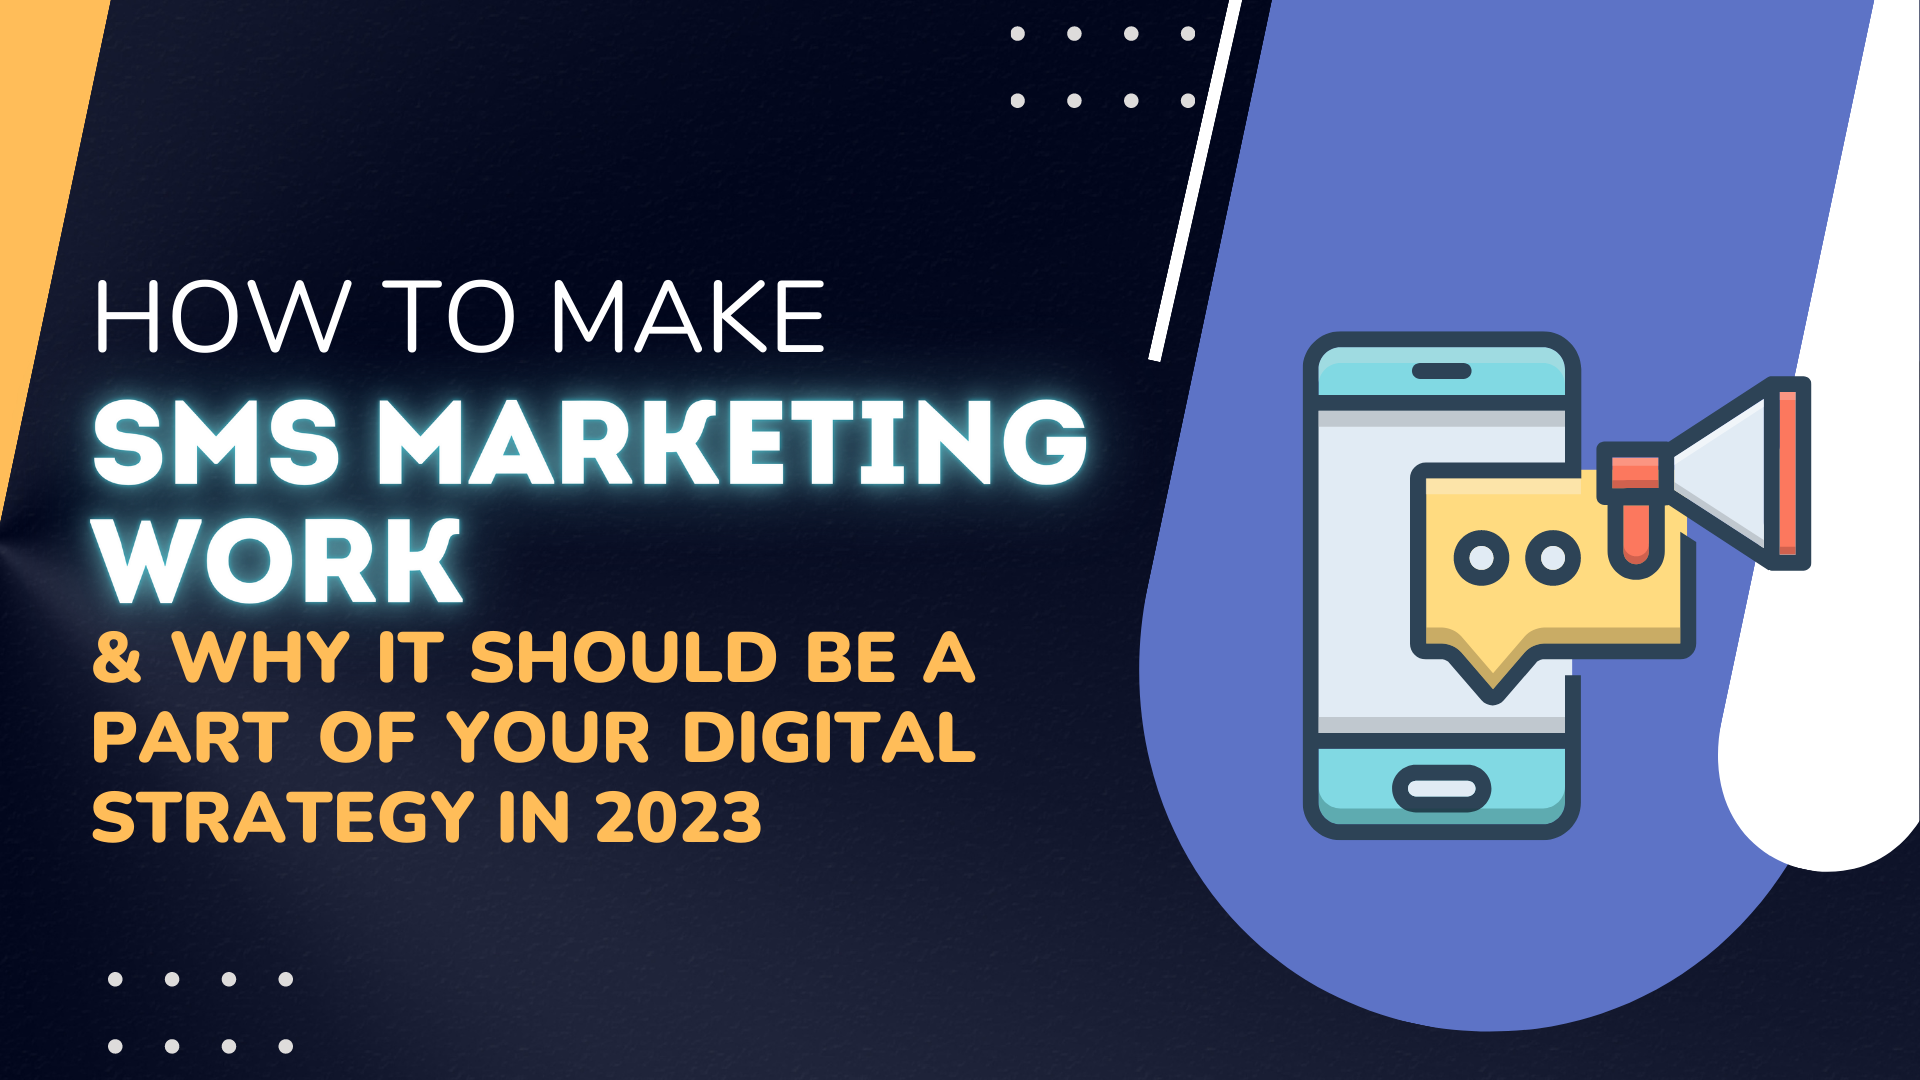 How To Make SMS Marketing Work for Your Local Business In 2023